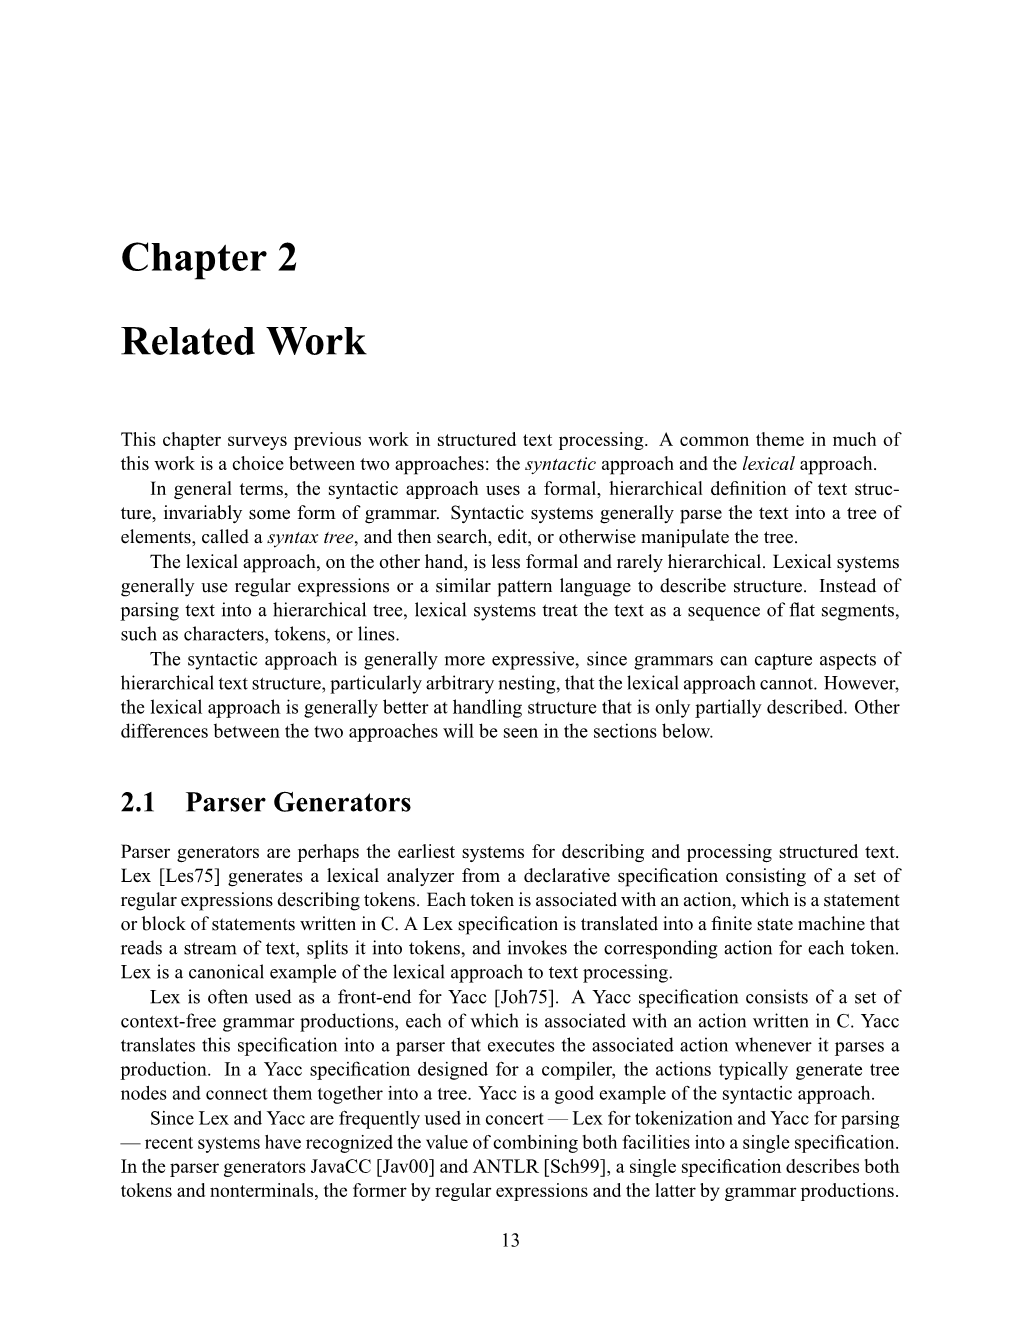 Chapter 2 Related Work